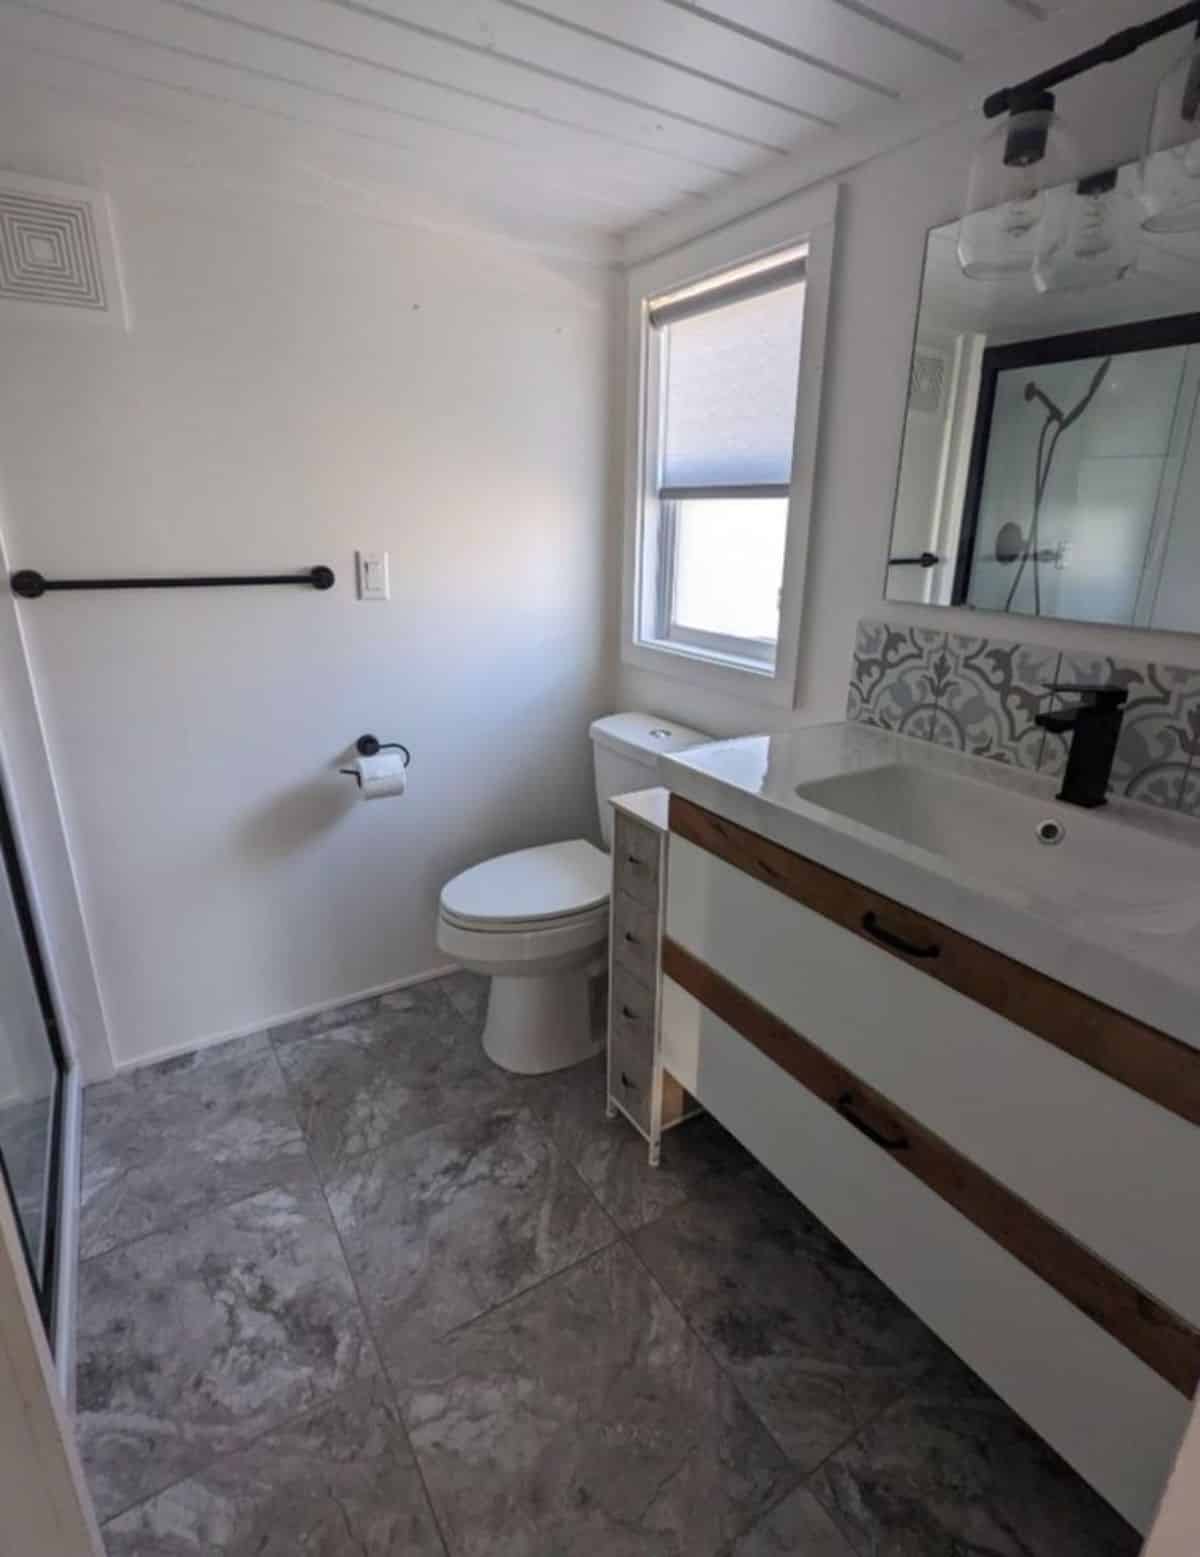 bathroom of three bedroom tiny house has all the standard fitting with ample space left to move